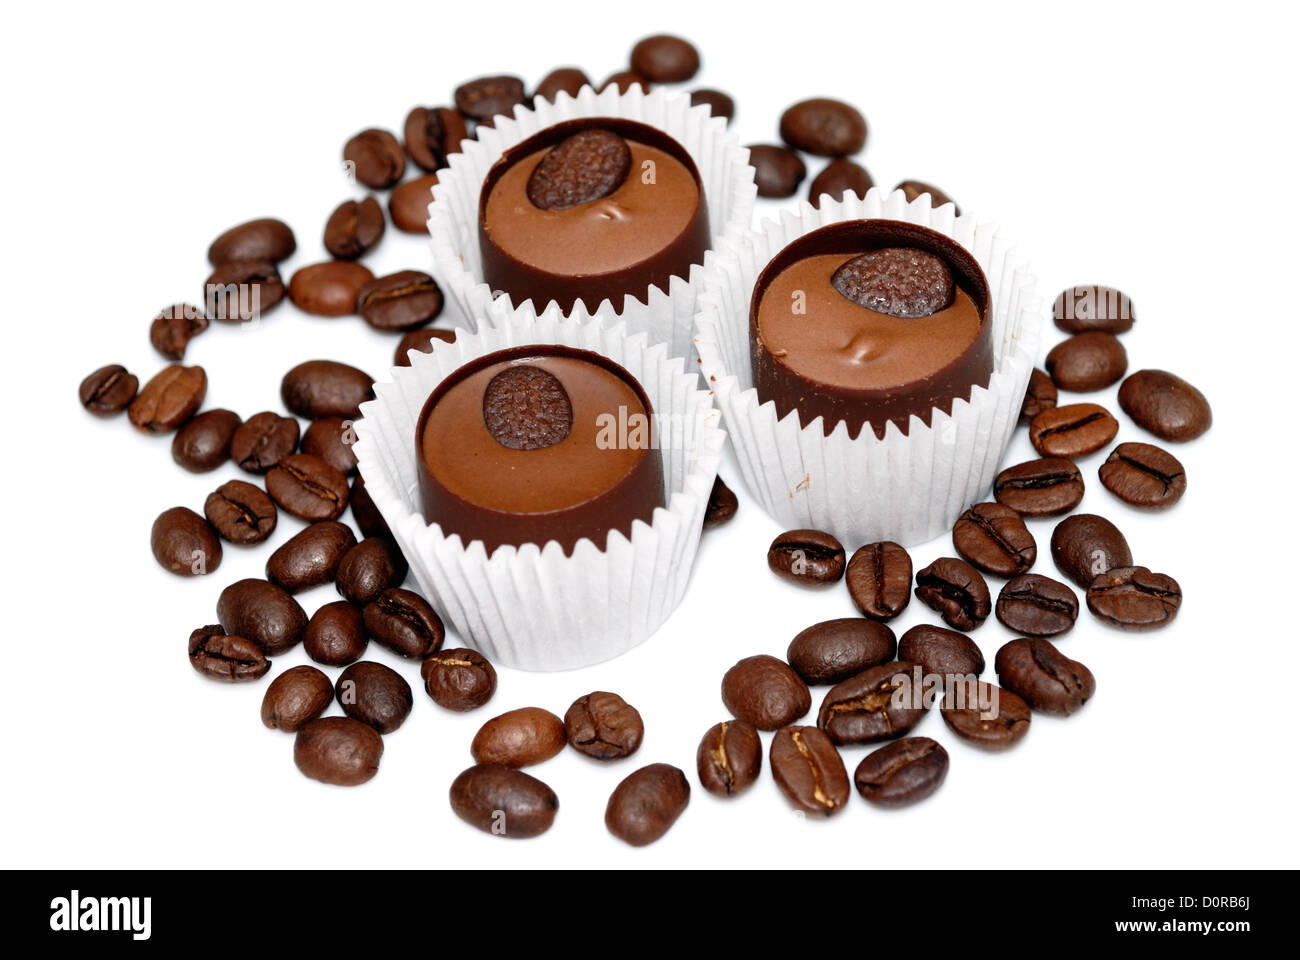 Sweet and coffee beans isolated Stock Photo